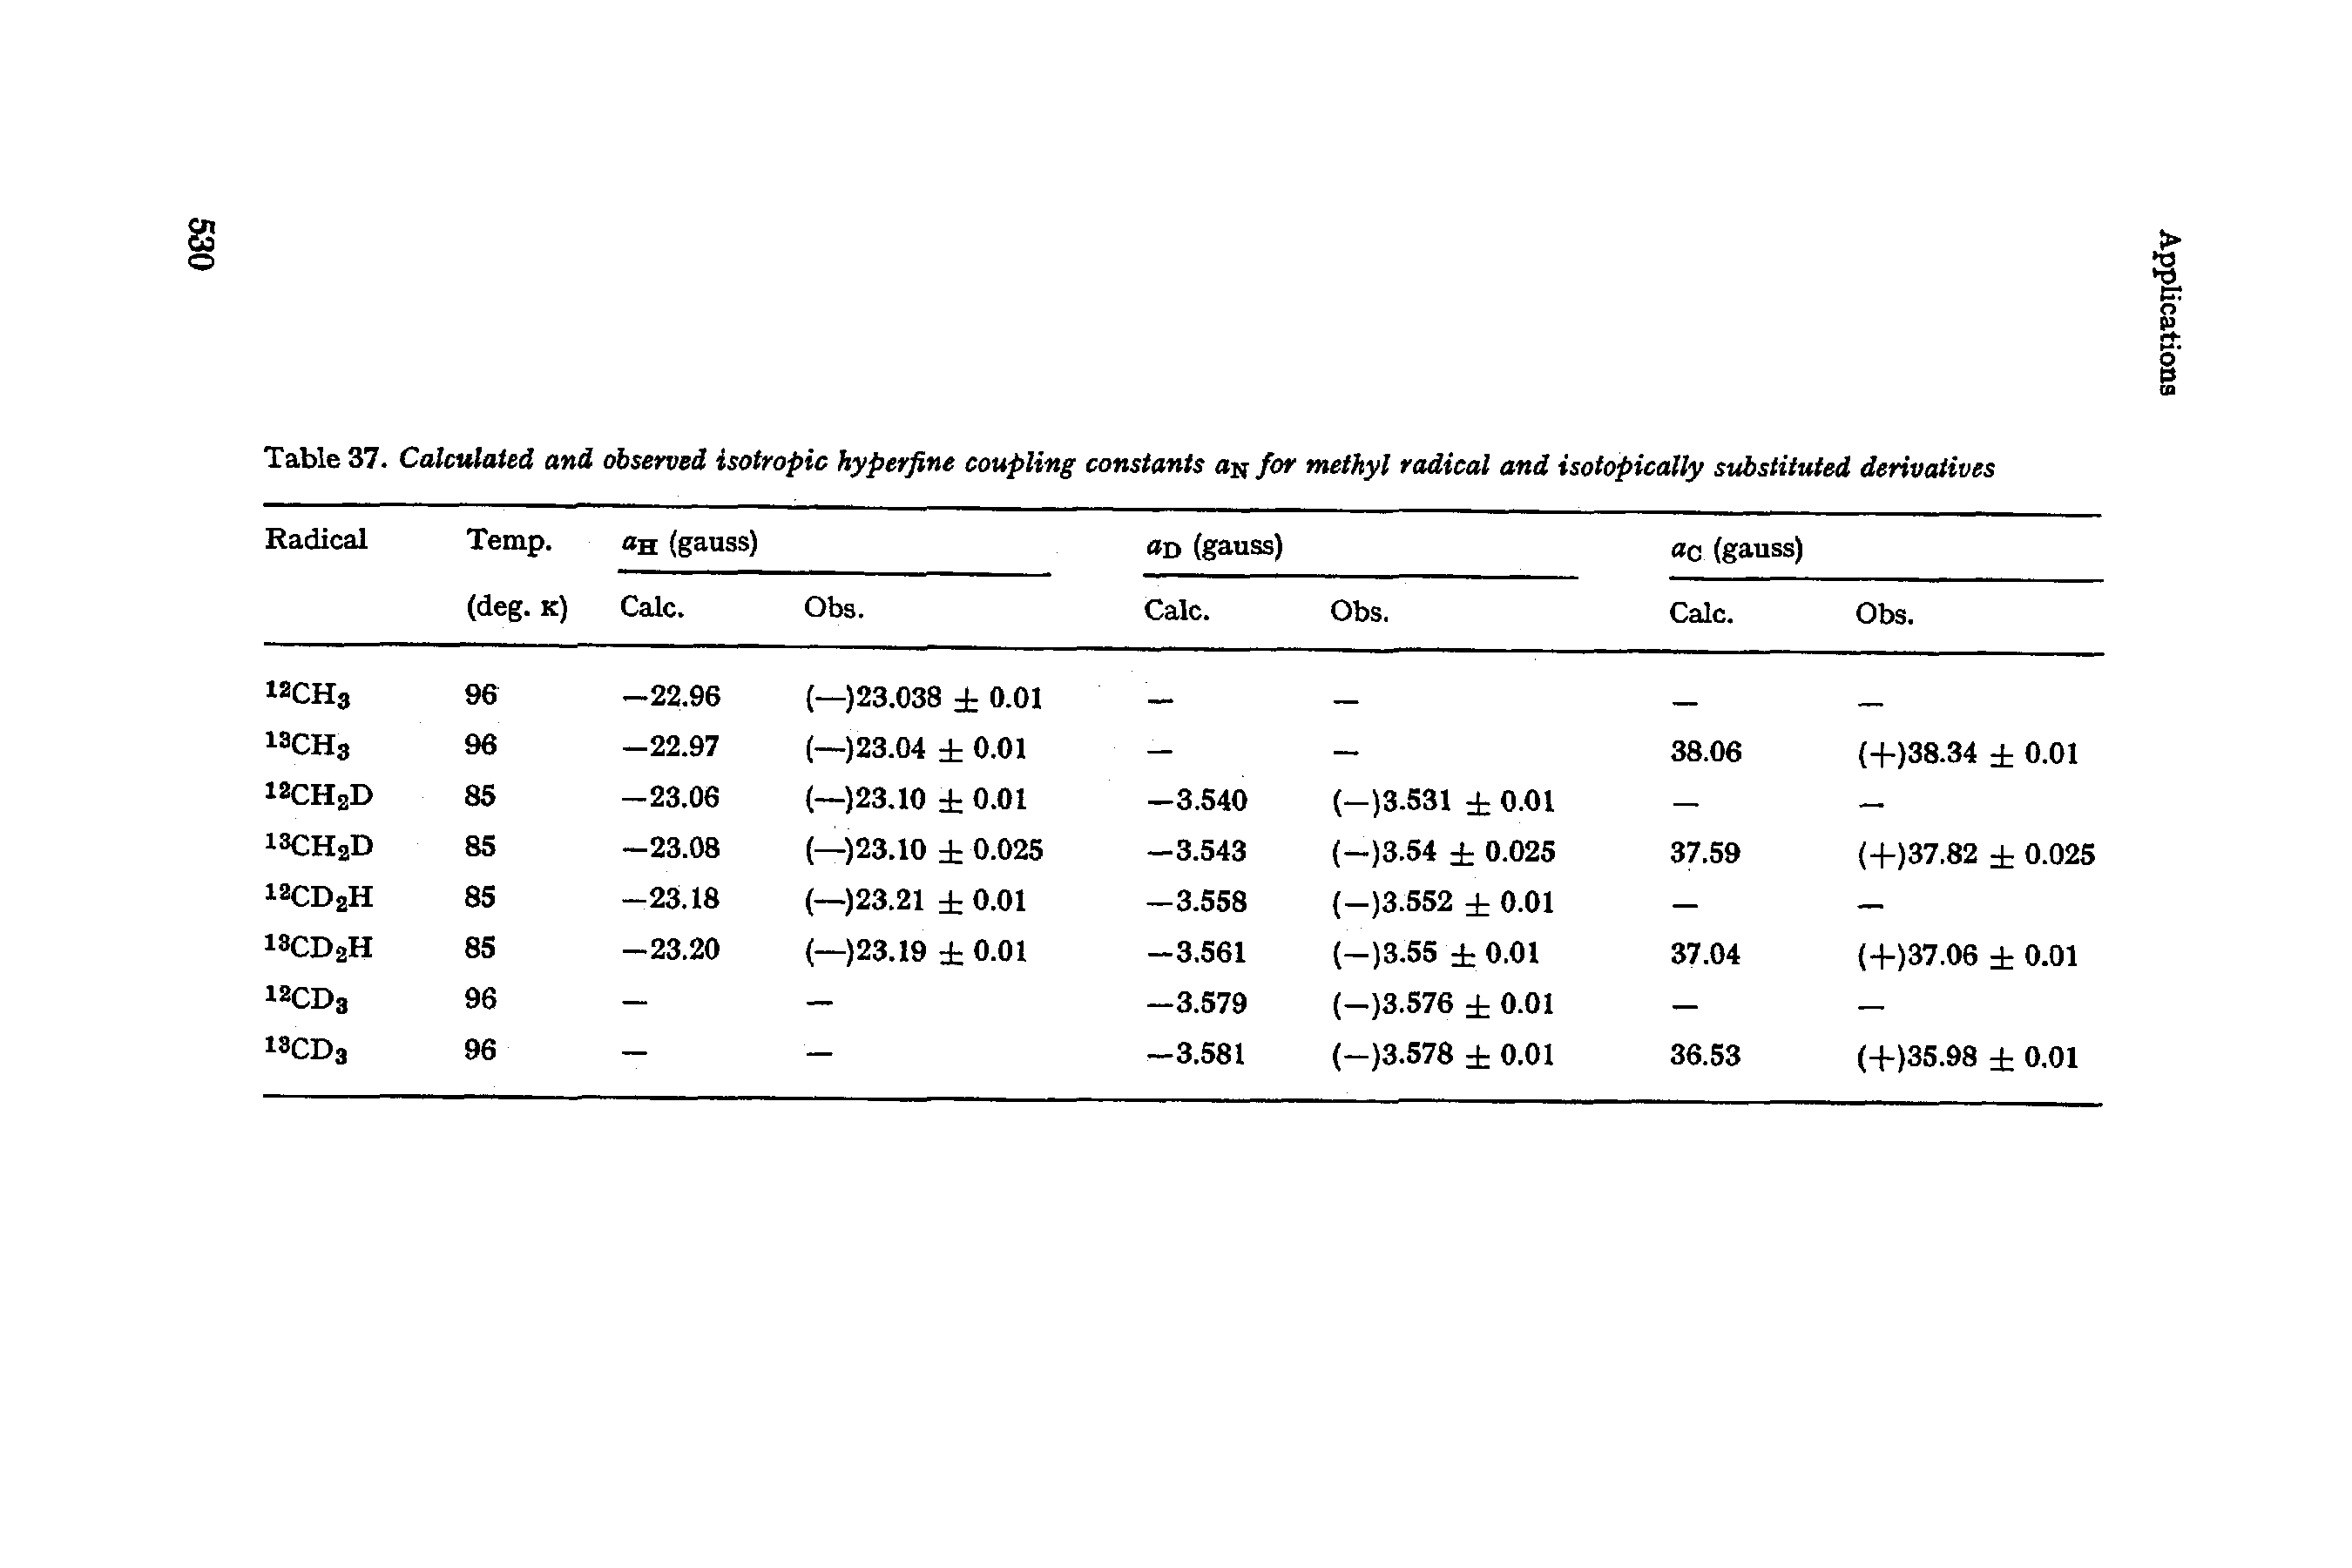 Table 37. Calculated and observed isotropic hyperfine coupling constants for methyl radical and isotopically substituted derivatives...